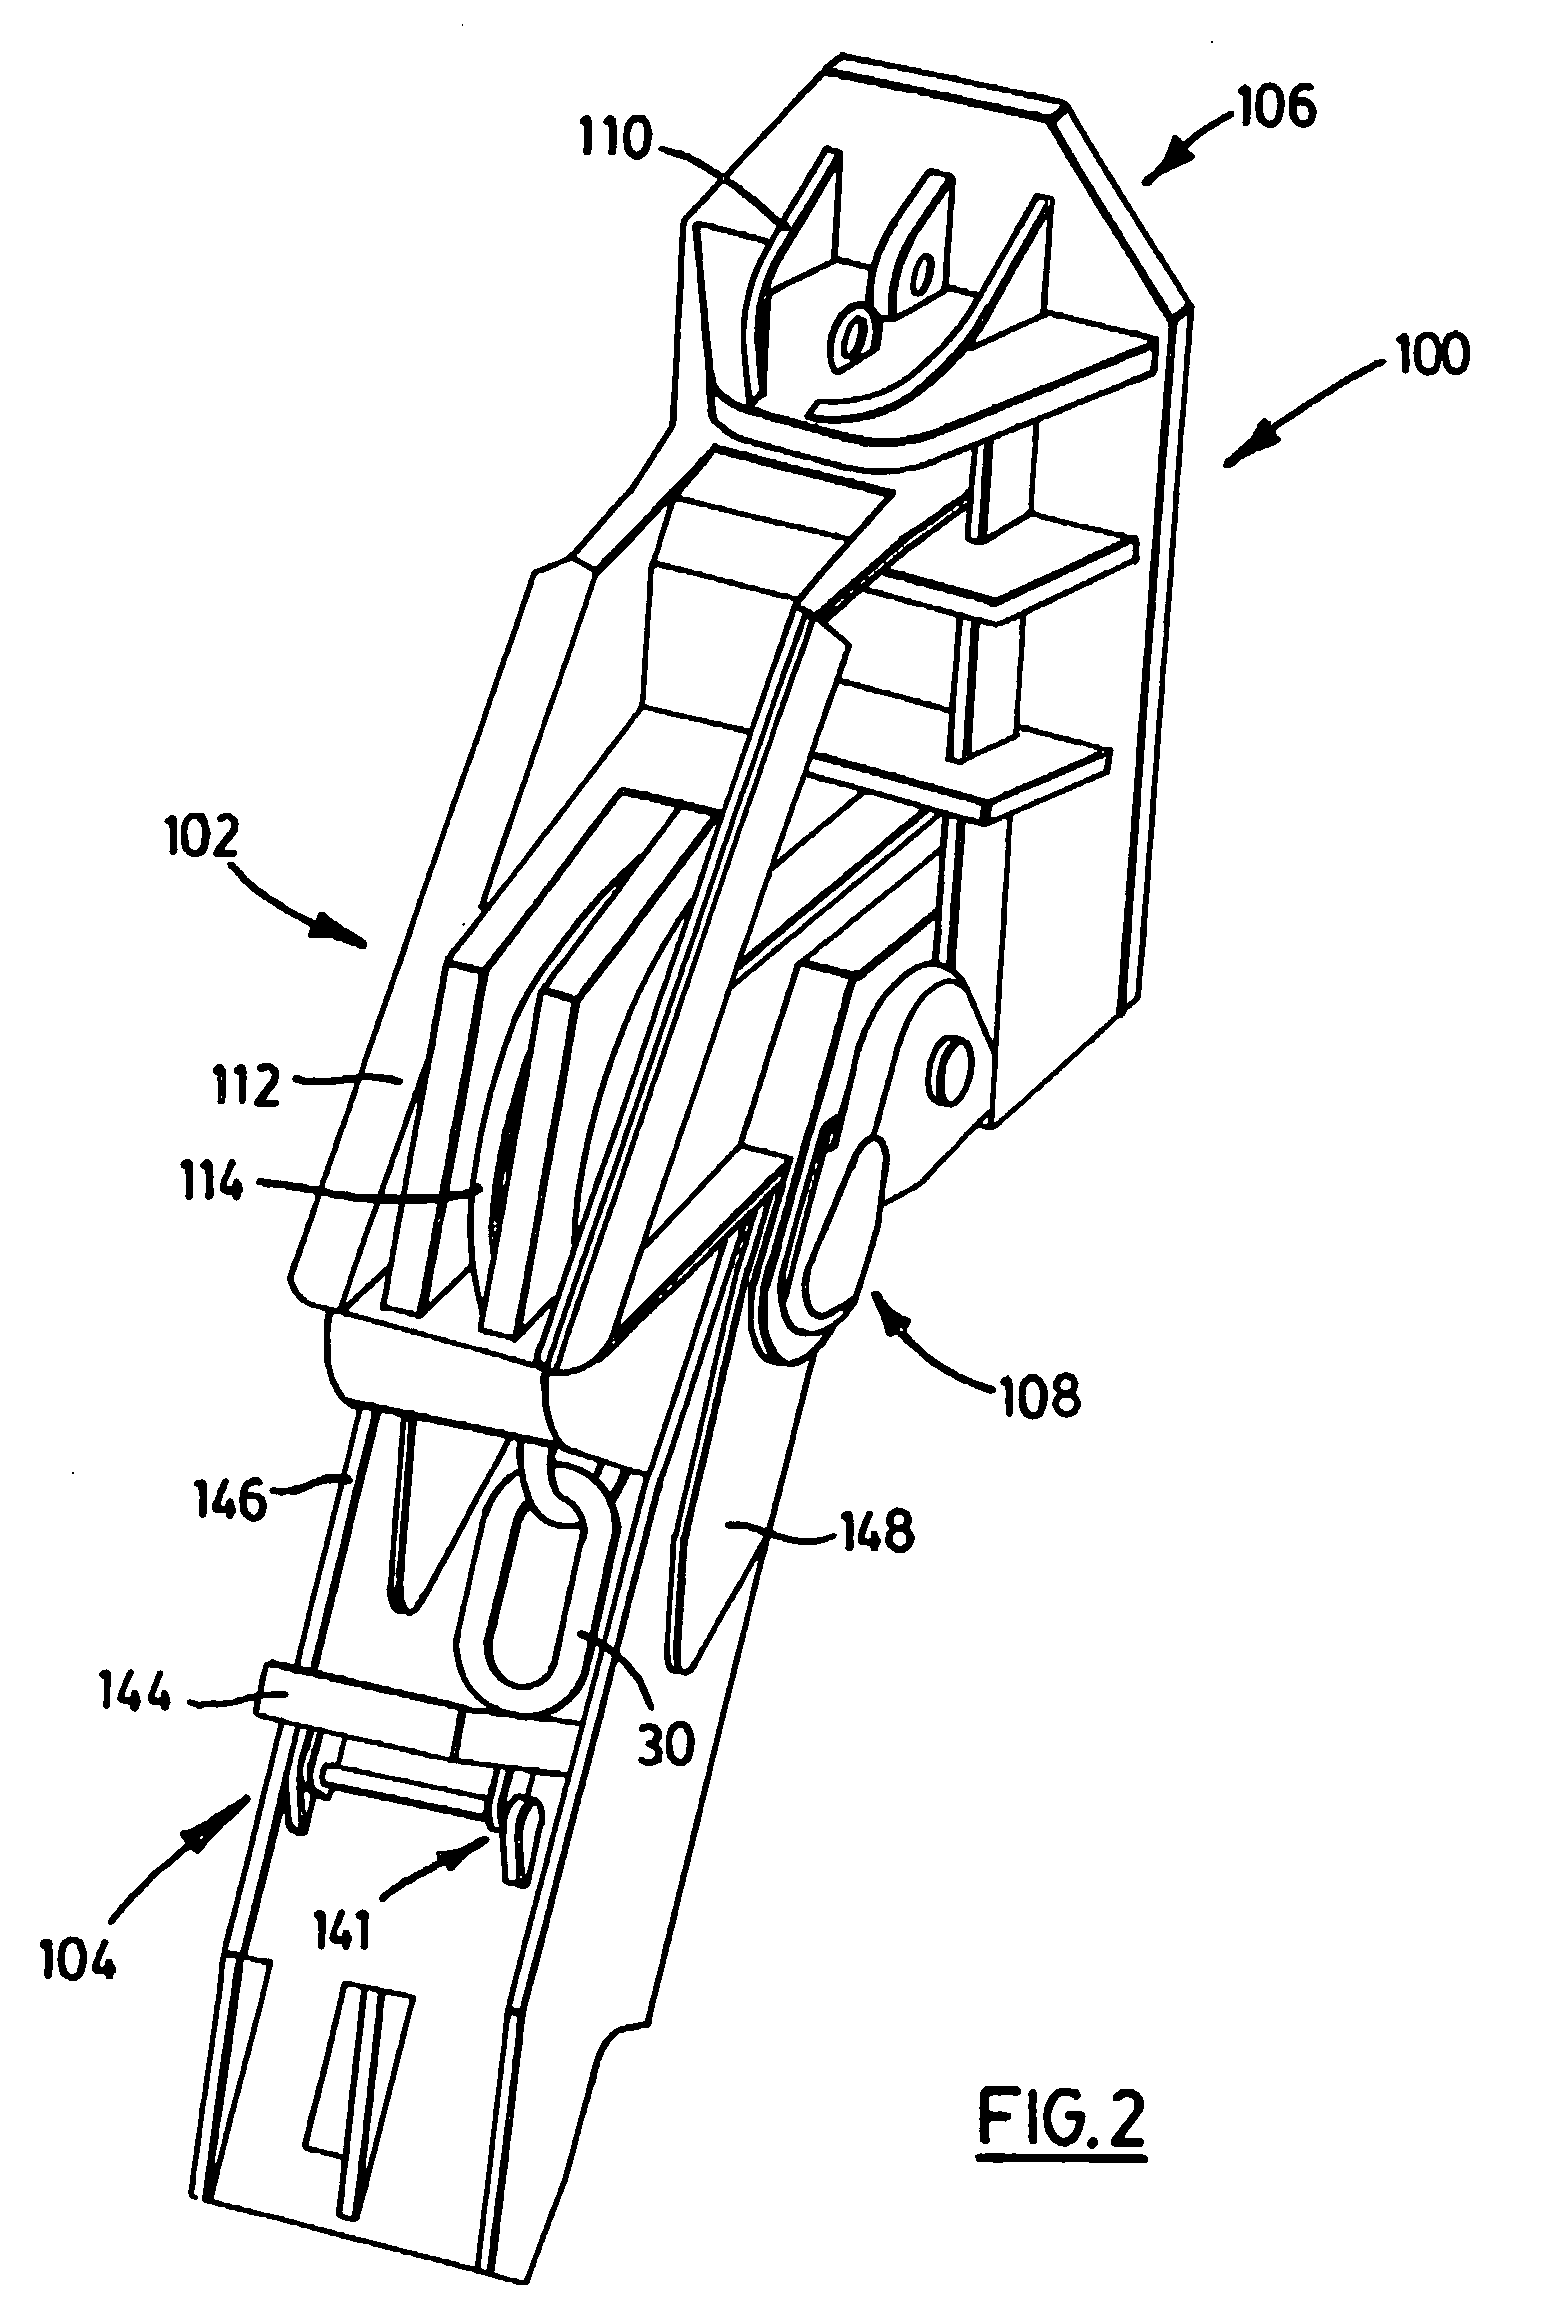 Underwater chain stopper and fairlead apparatus for anchoring offshore structures